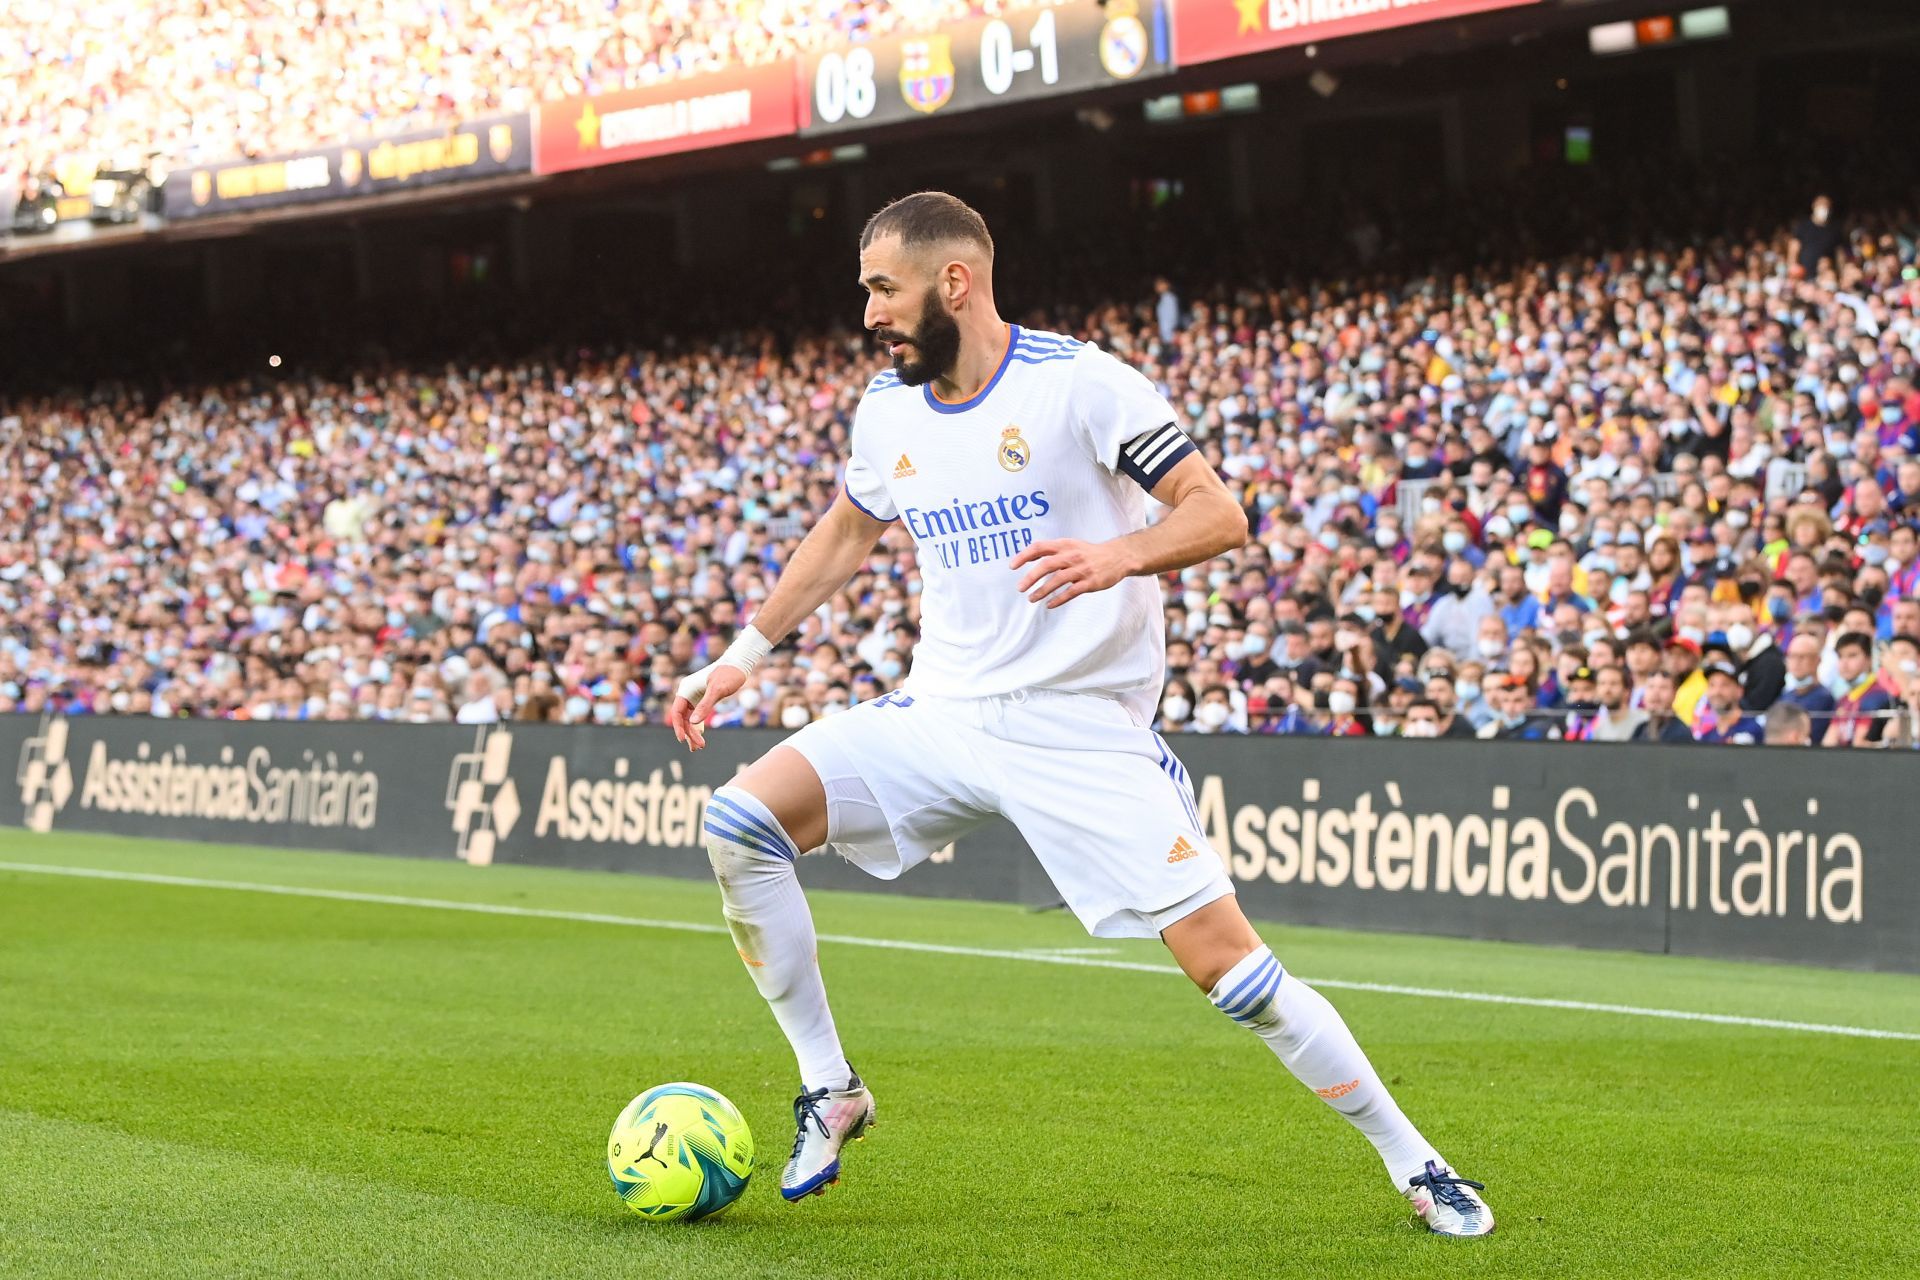 Karim Benzema has scored over 70 goals in the Champions League.